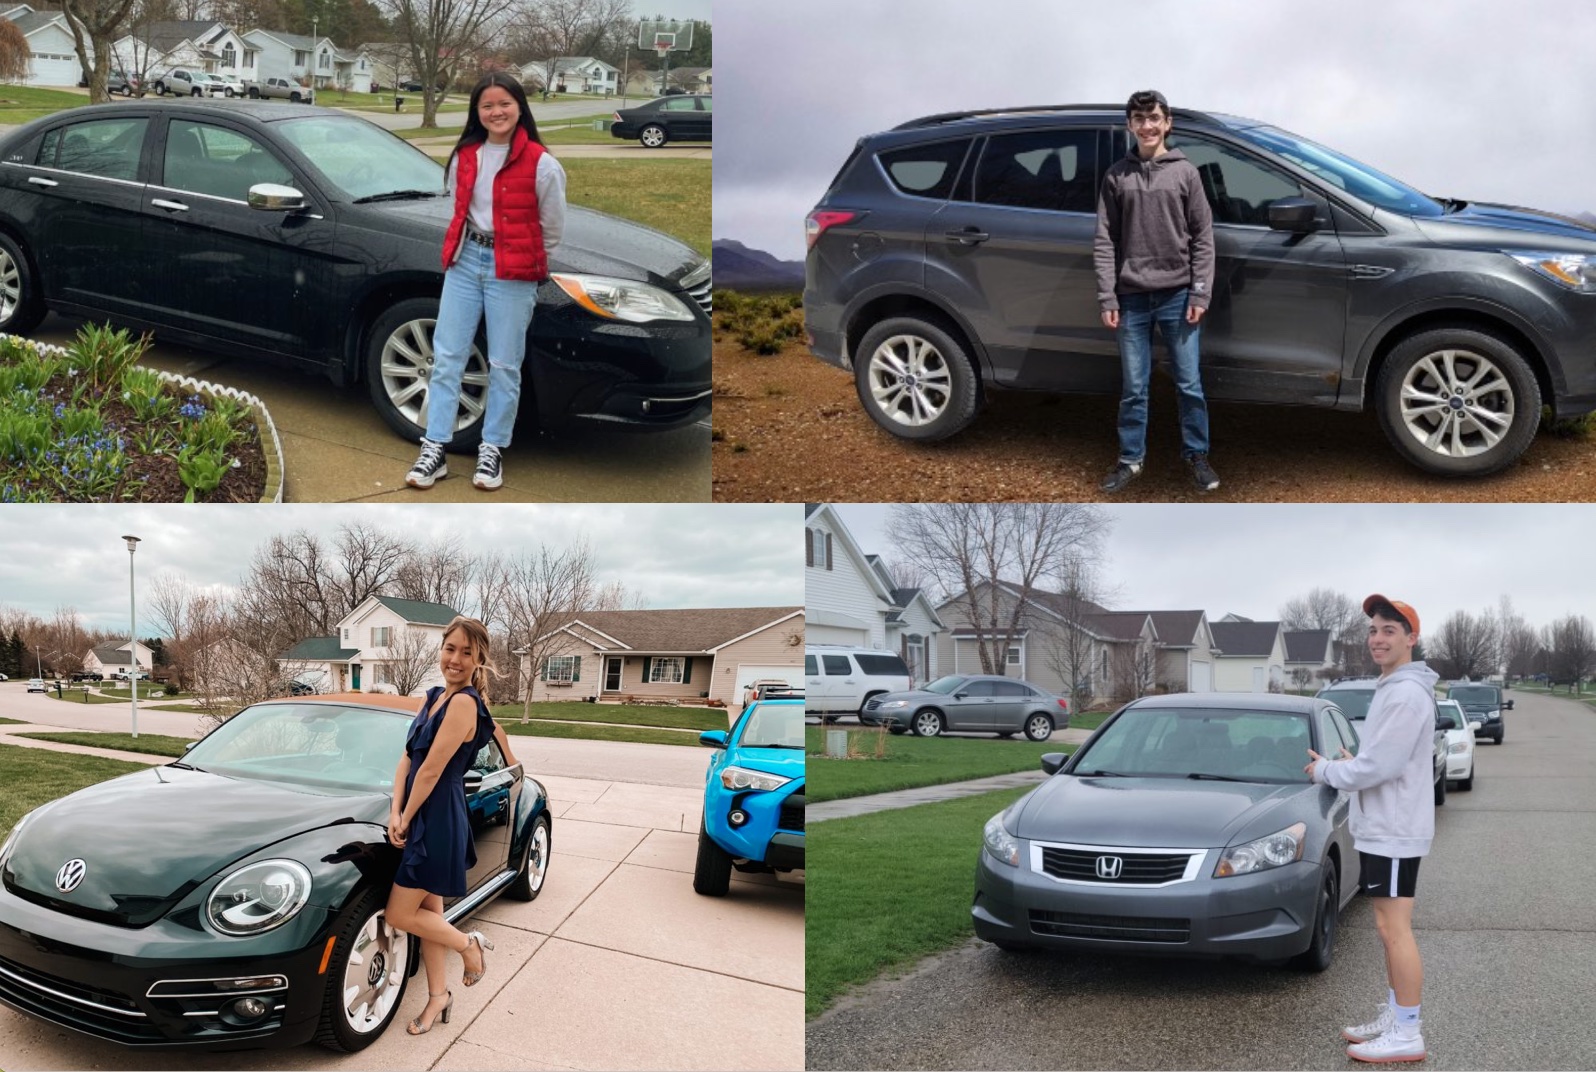 Top left to right: Anh Dang and Ethan Singer; bottom left to right: Rylie Steuer and Connor Wolfe; images courtesy of Michigan Auto Law.